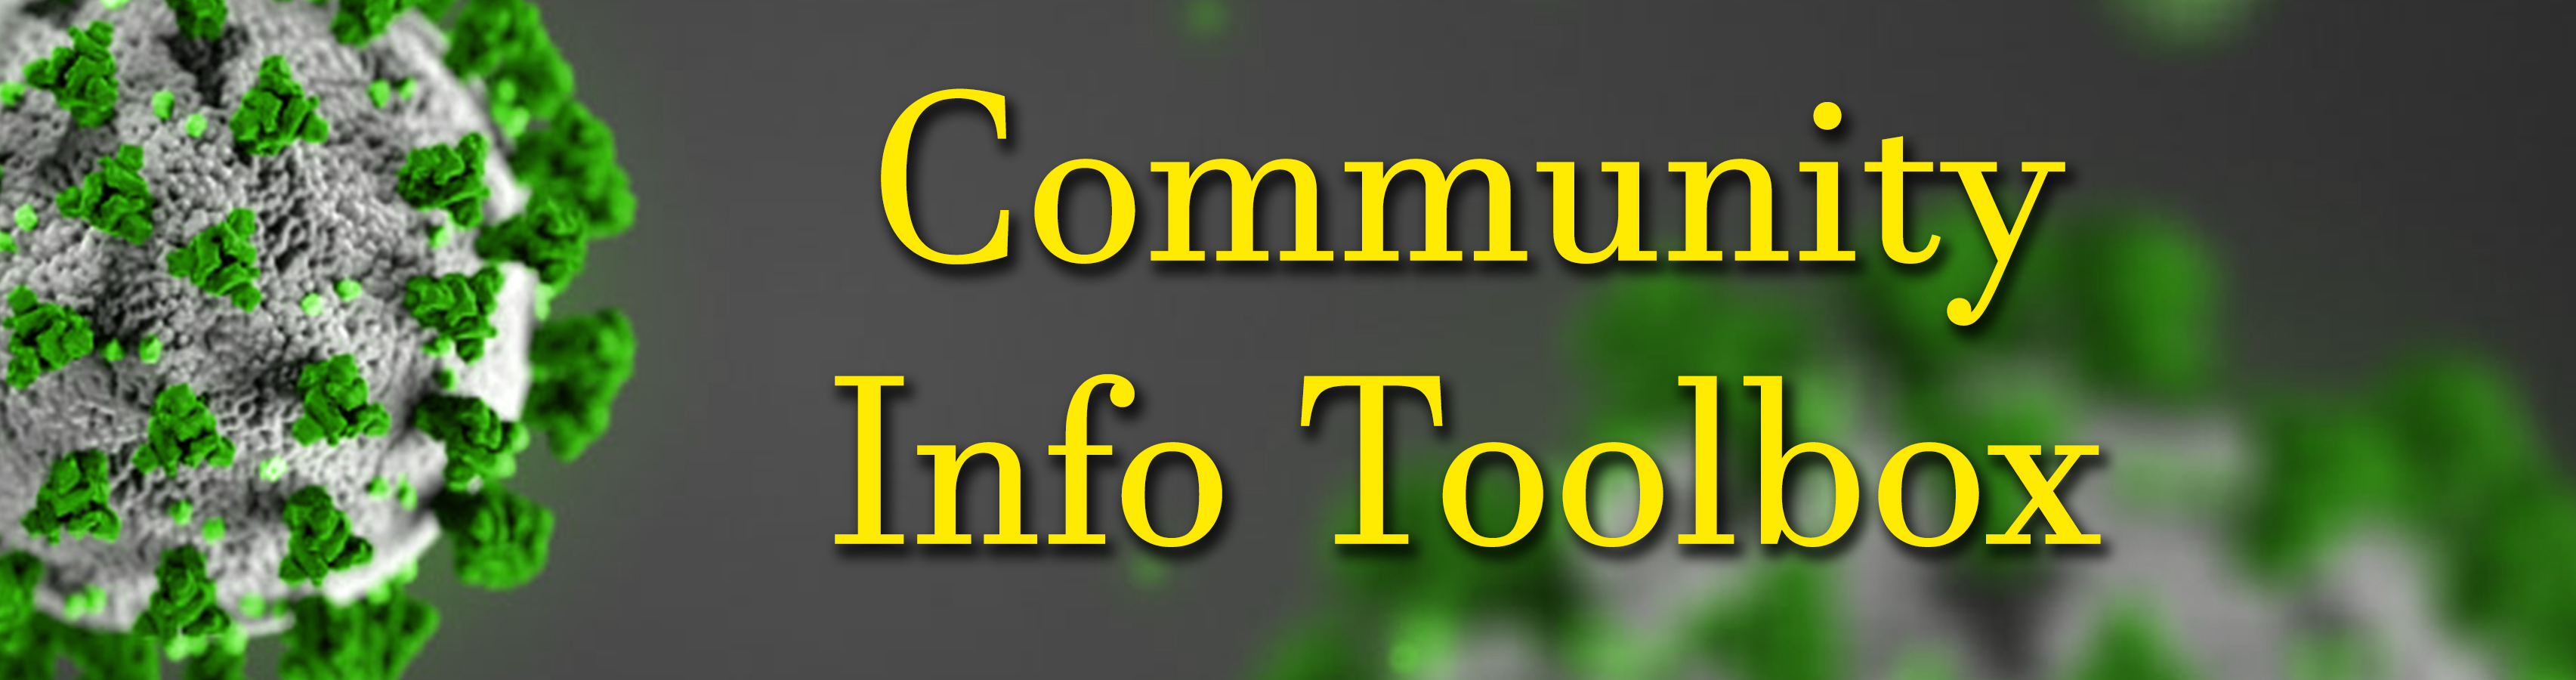 Community info toolbox graphic